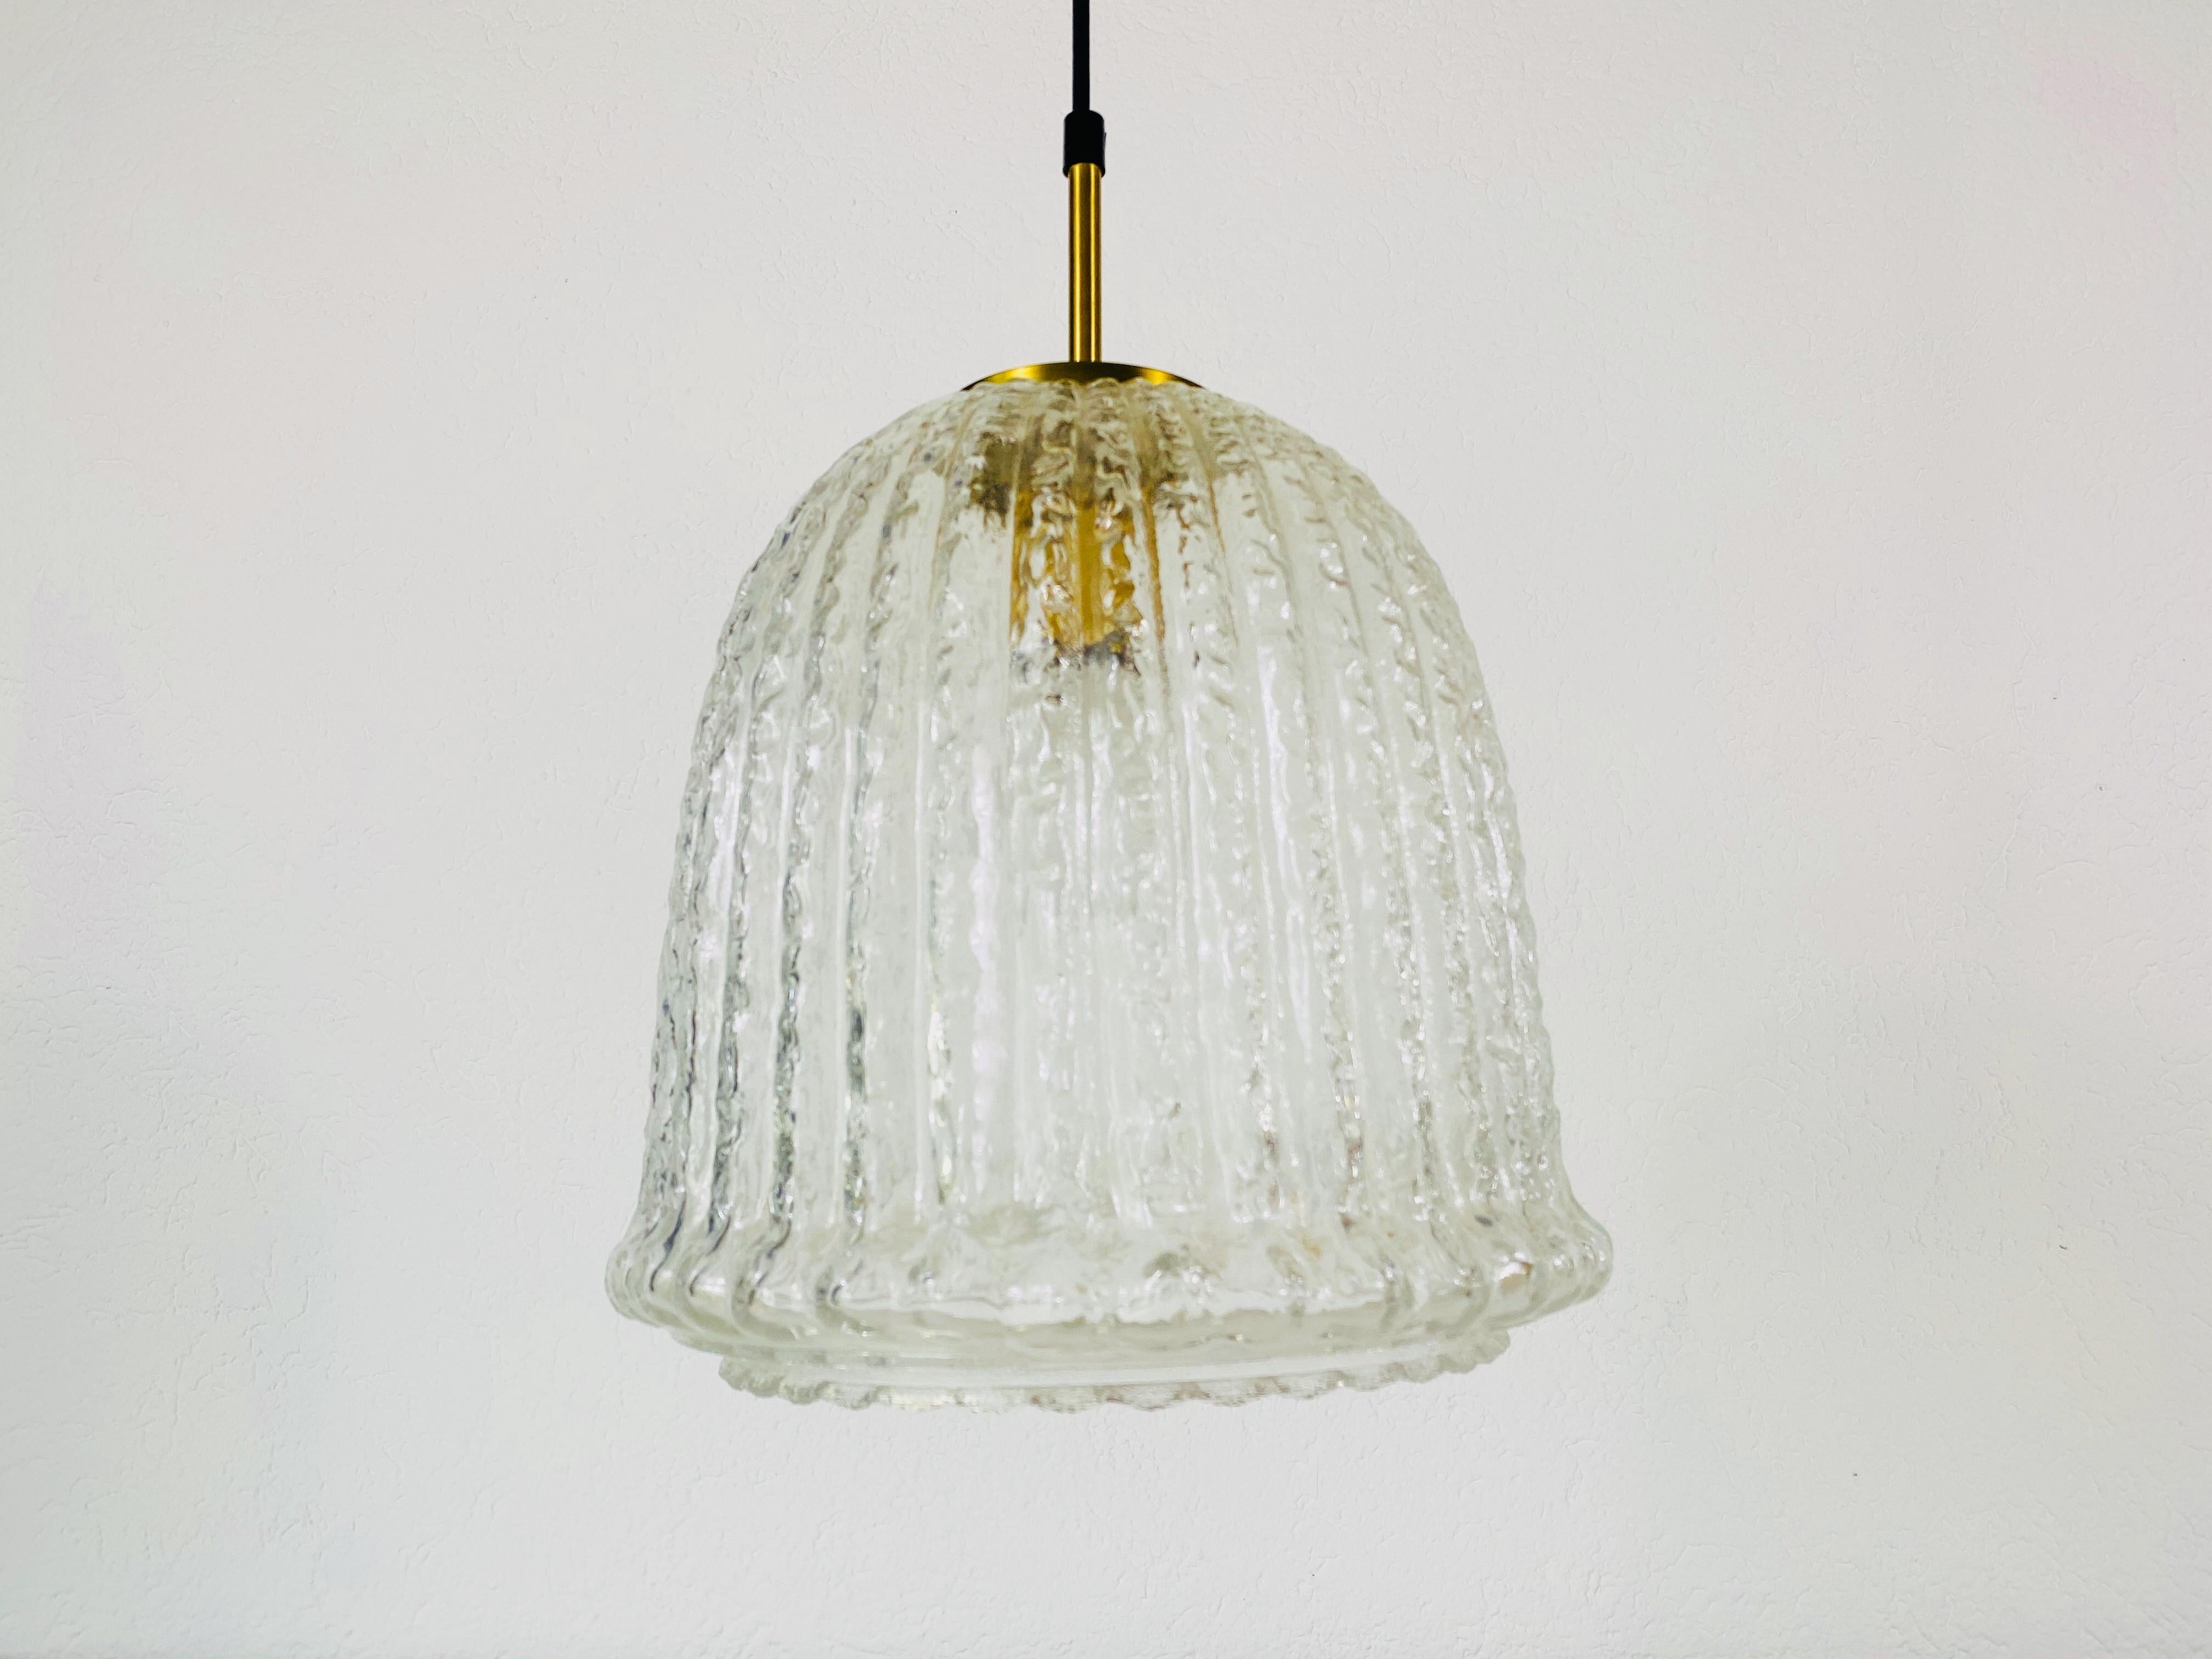 A Mid-Century Modern pendant lamp by Glashütte Limburg made in the 1960s in Germany. It is fascinating with its beautiful shape. Structured glass with brass top.

The light requires one E27 light bulb. Very good vintage condition.

Free